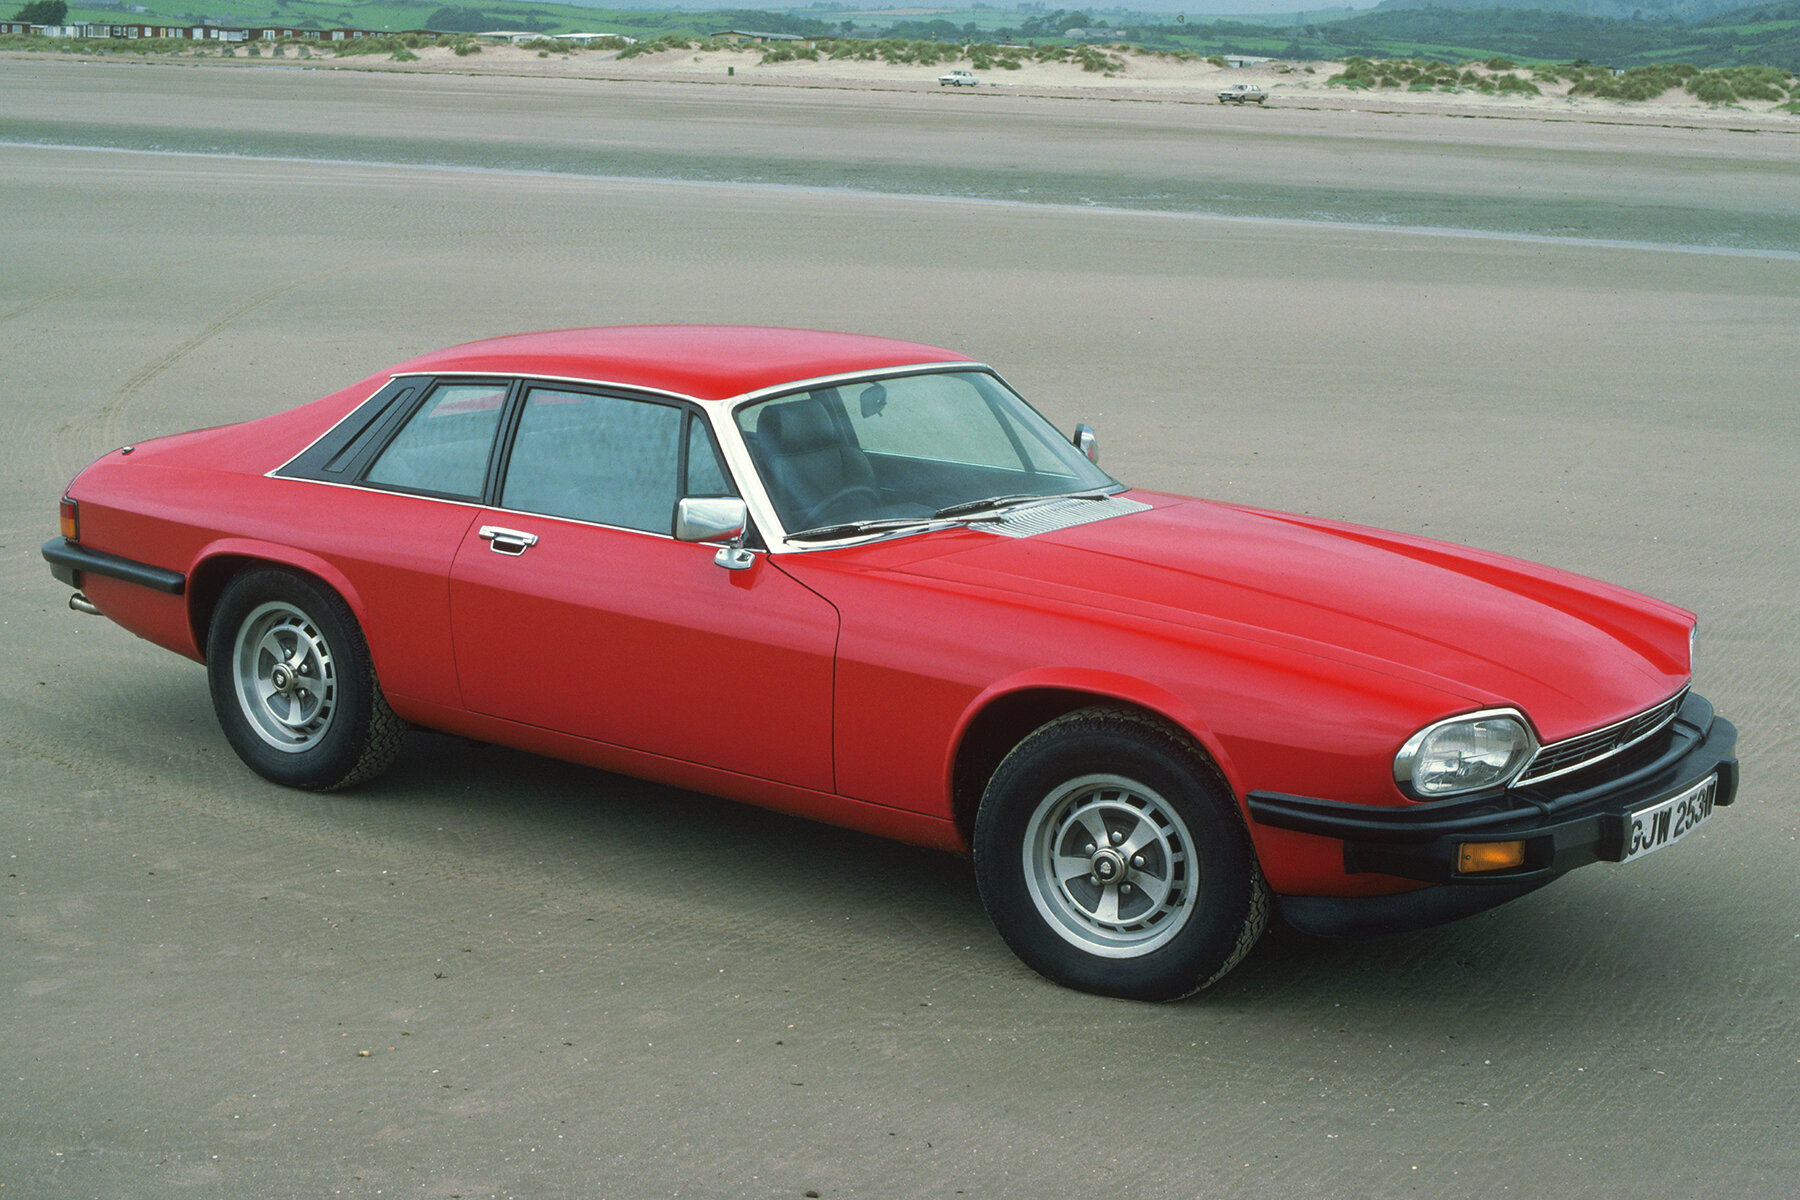 A late pre-HE Jaguar XJ-S – it’s a fine-looking car these days, make no mistake.